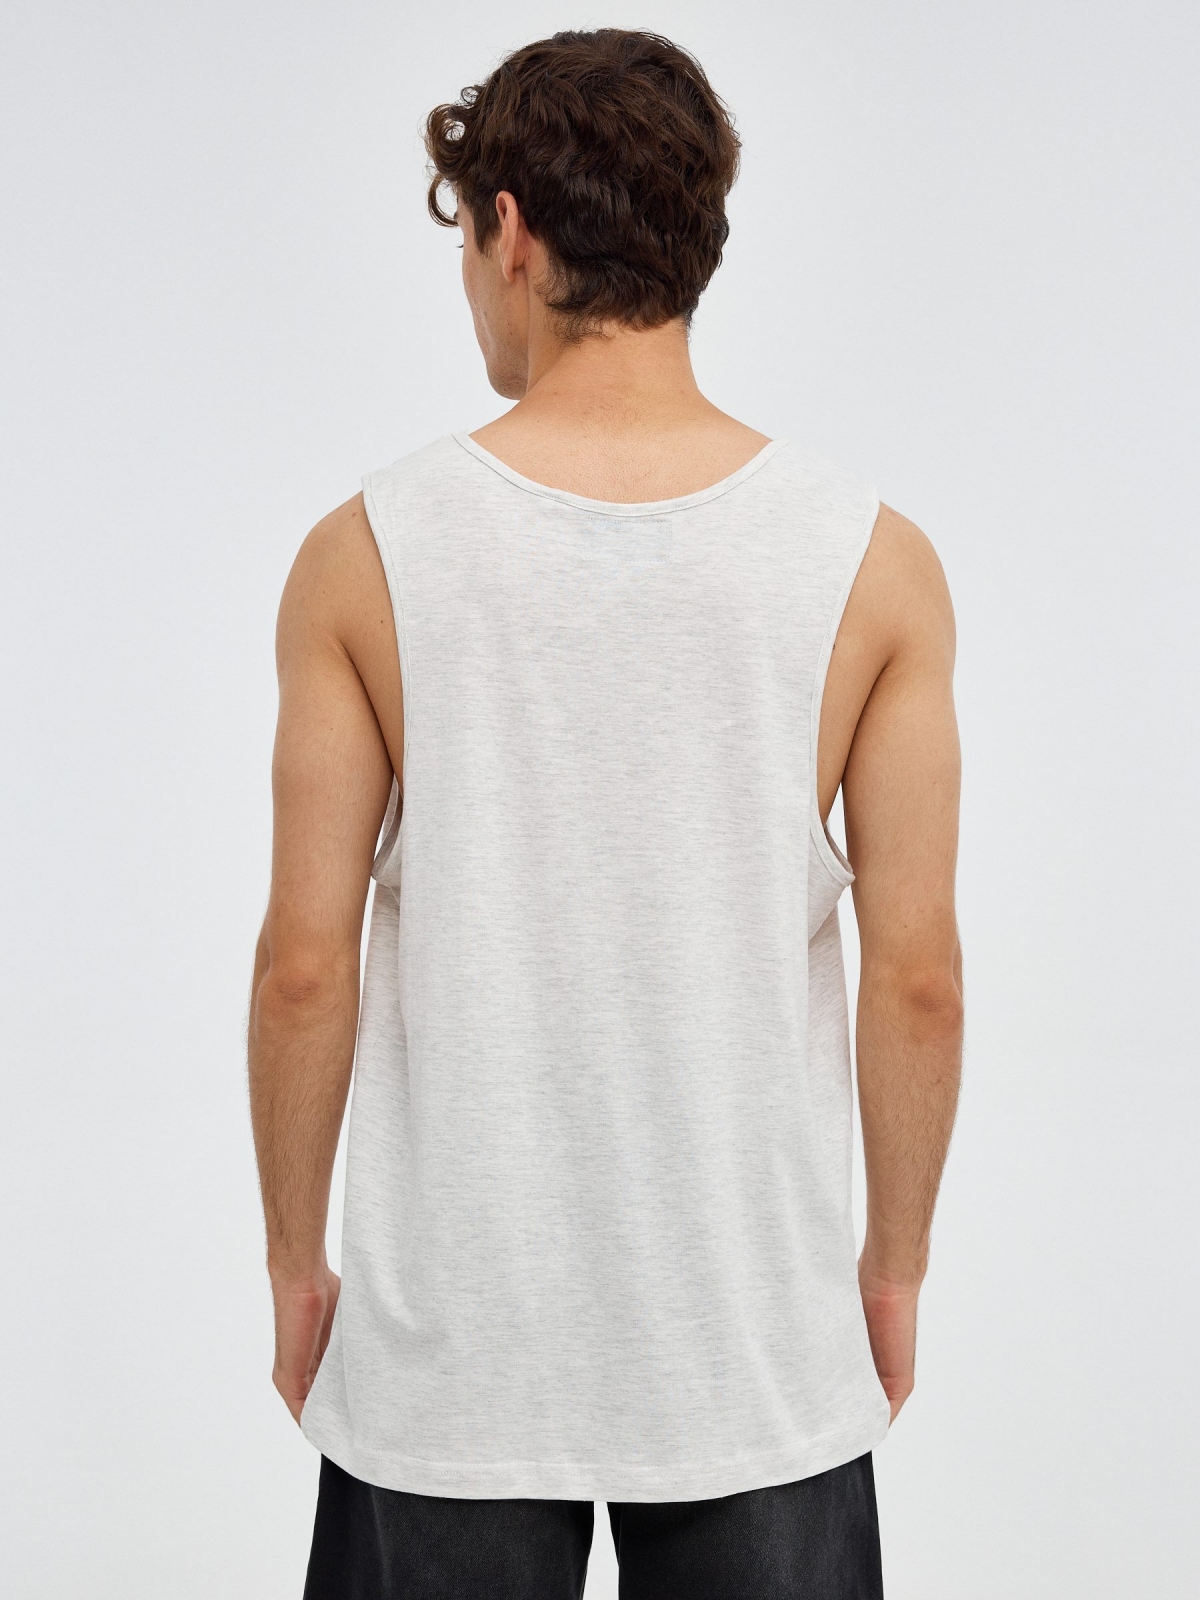 Tokyo tank top grey middle back view